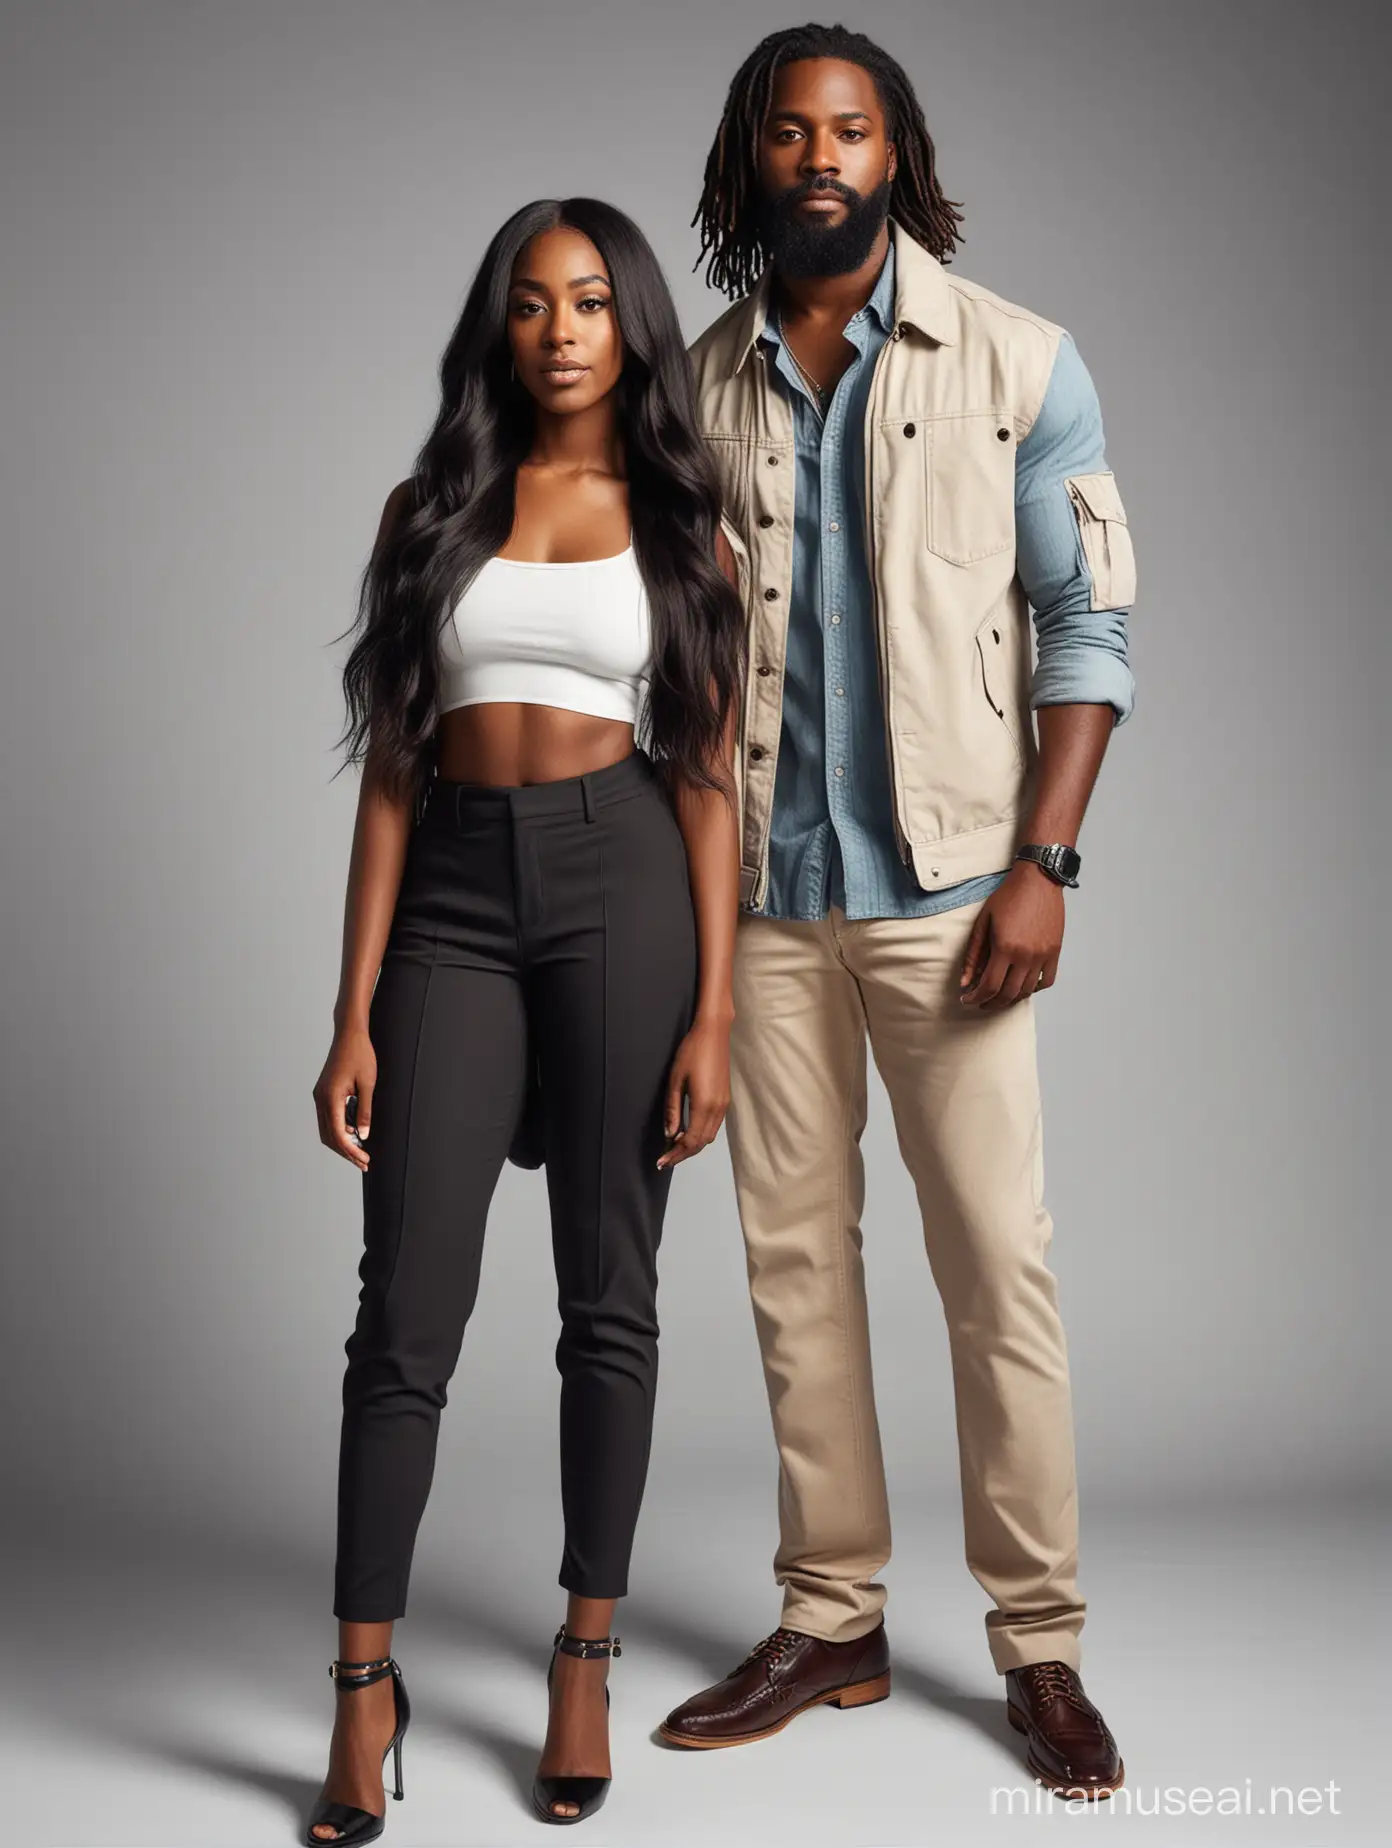 Fashionable Black Couple Standing Together in Stylish Attire